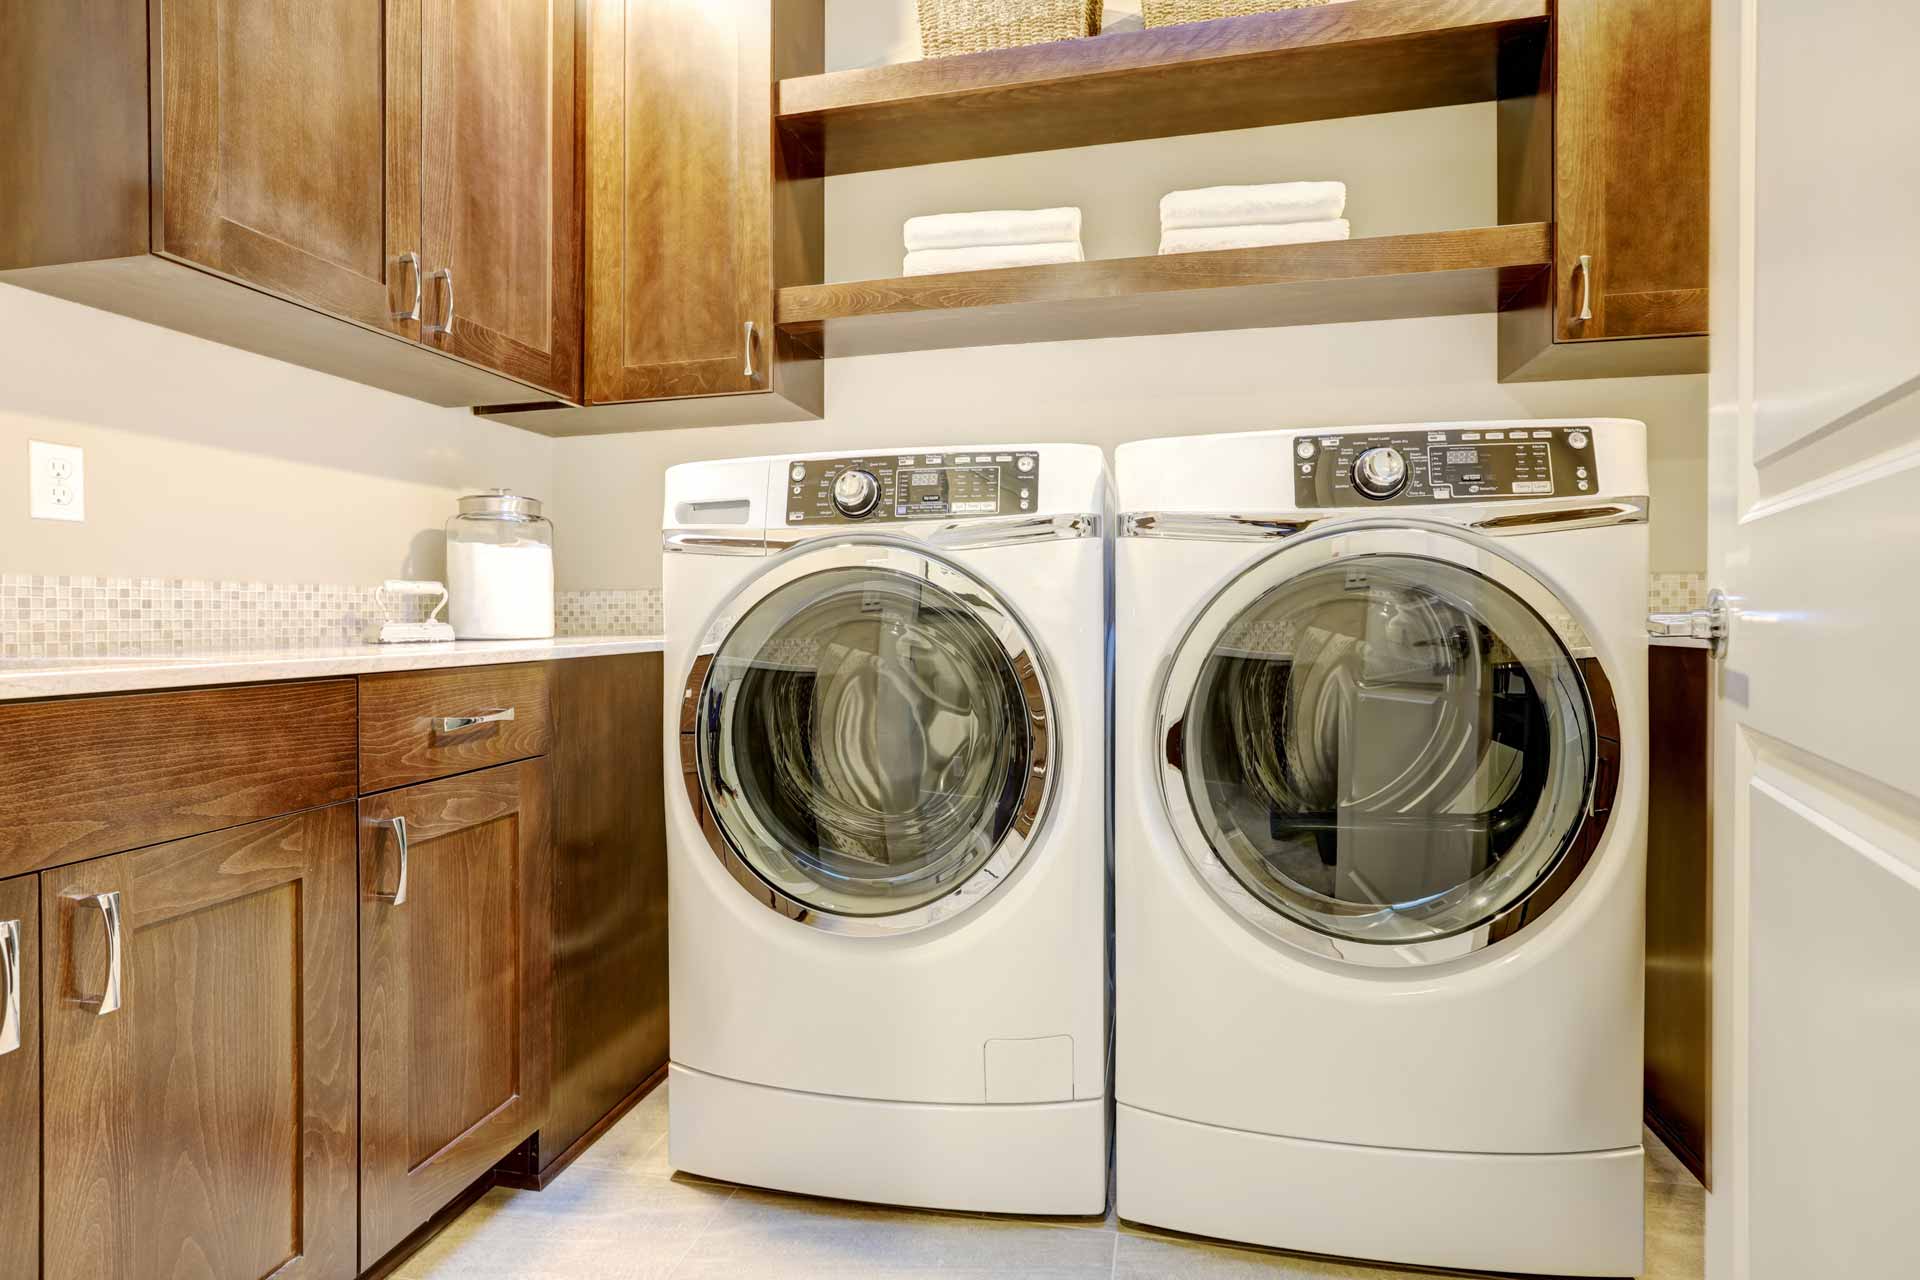 Washer and dryer in a laundry room